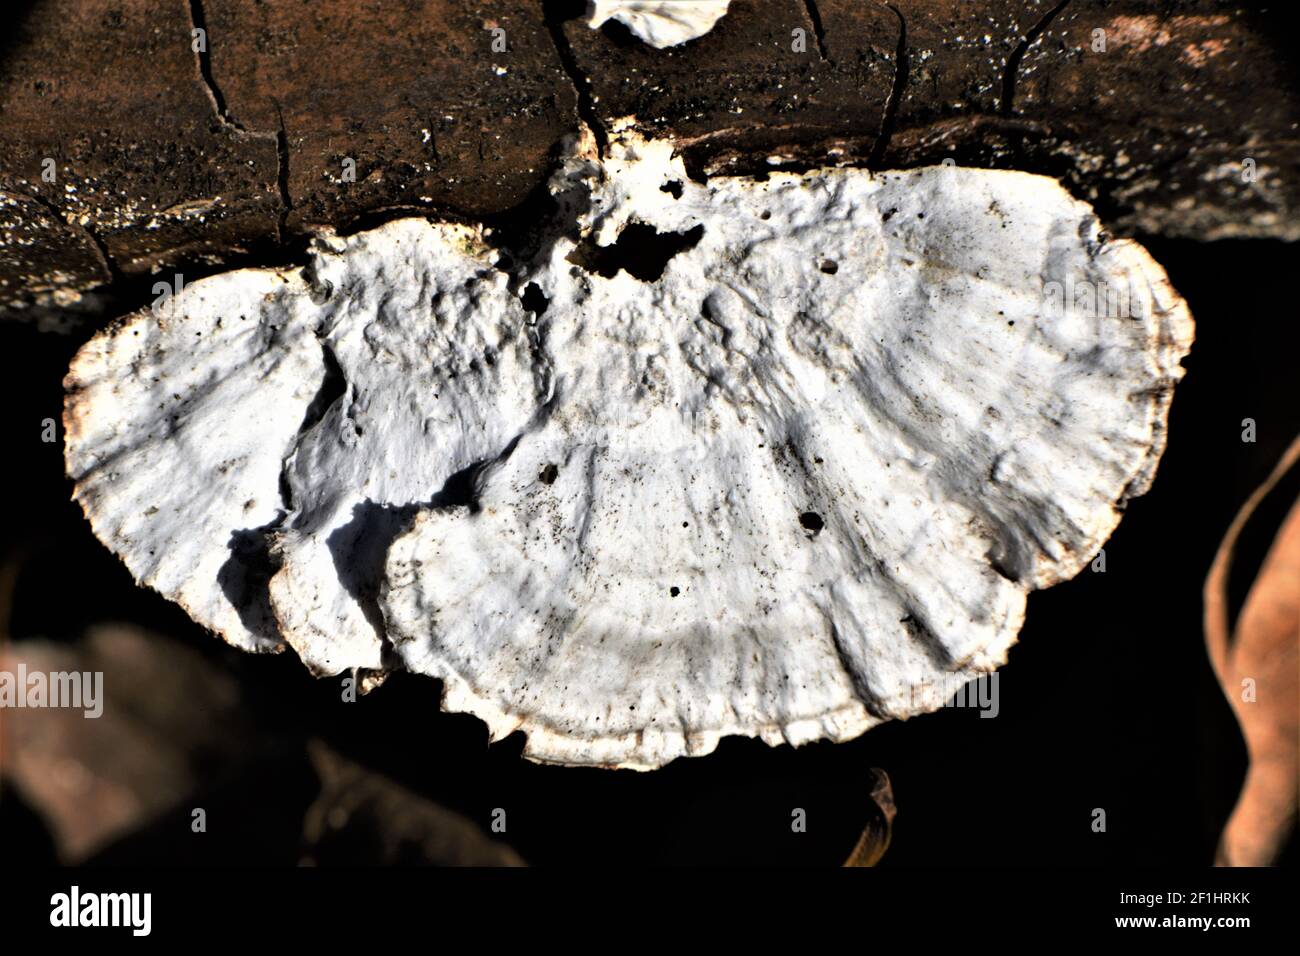 White tree fungus growing on dead tree branches. Stock Photo